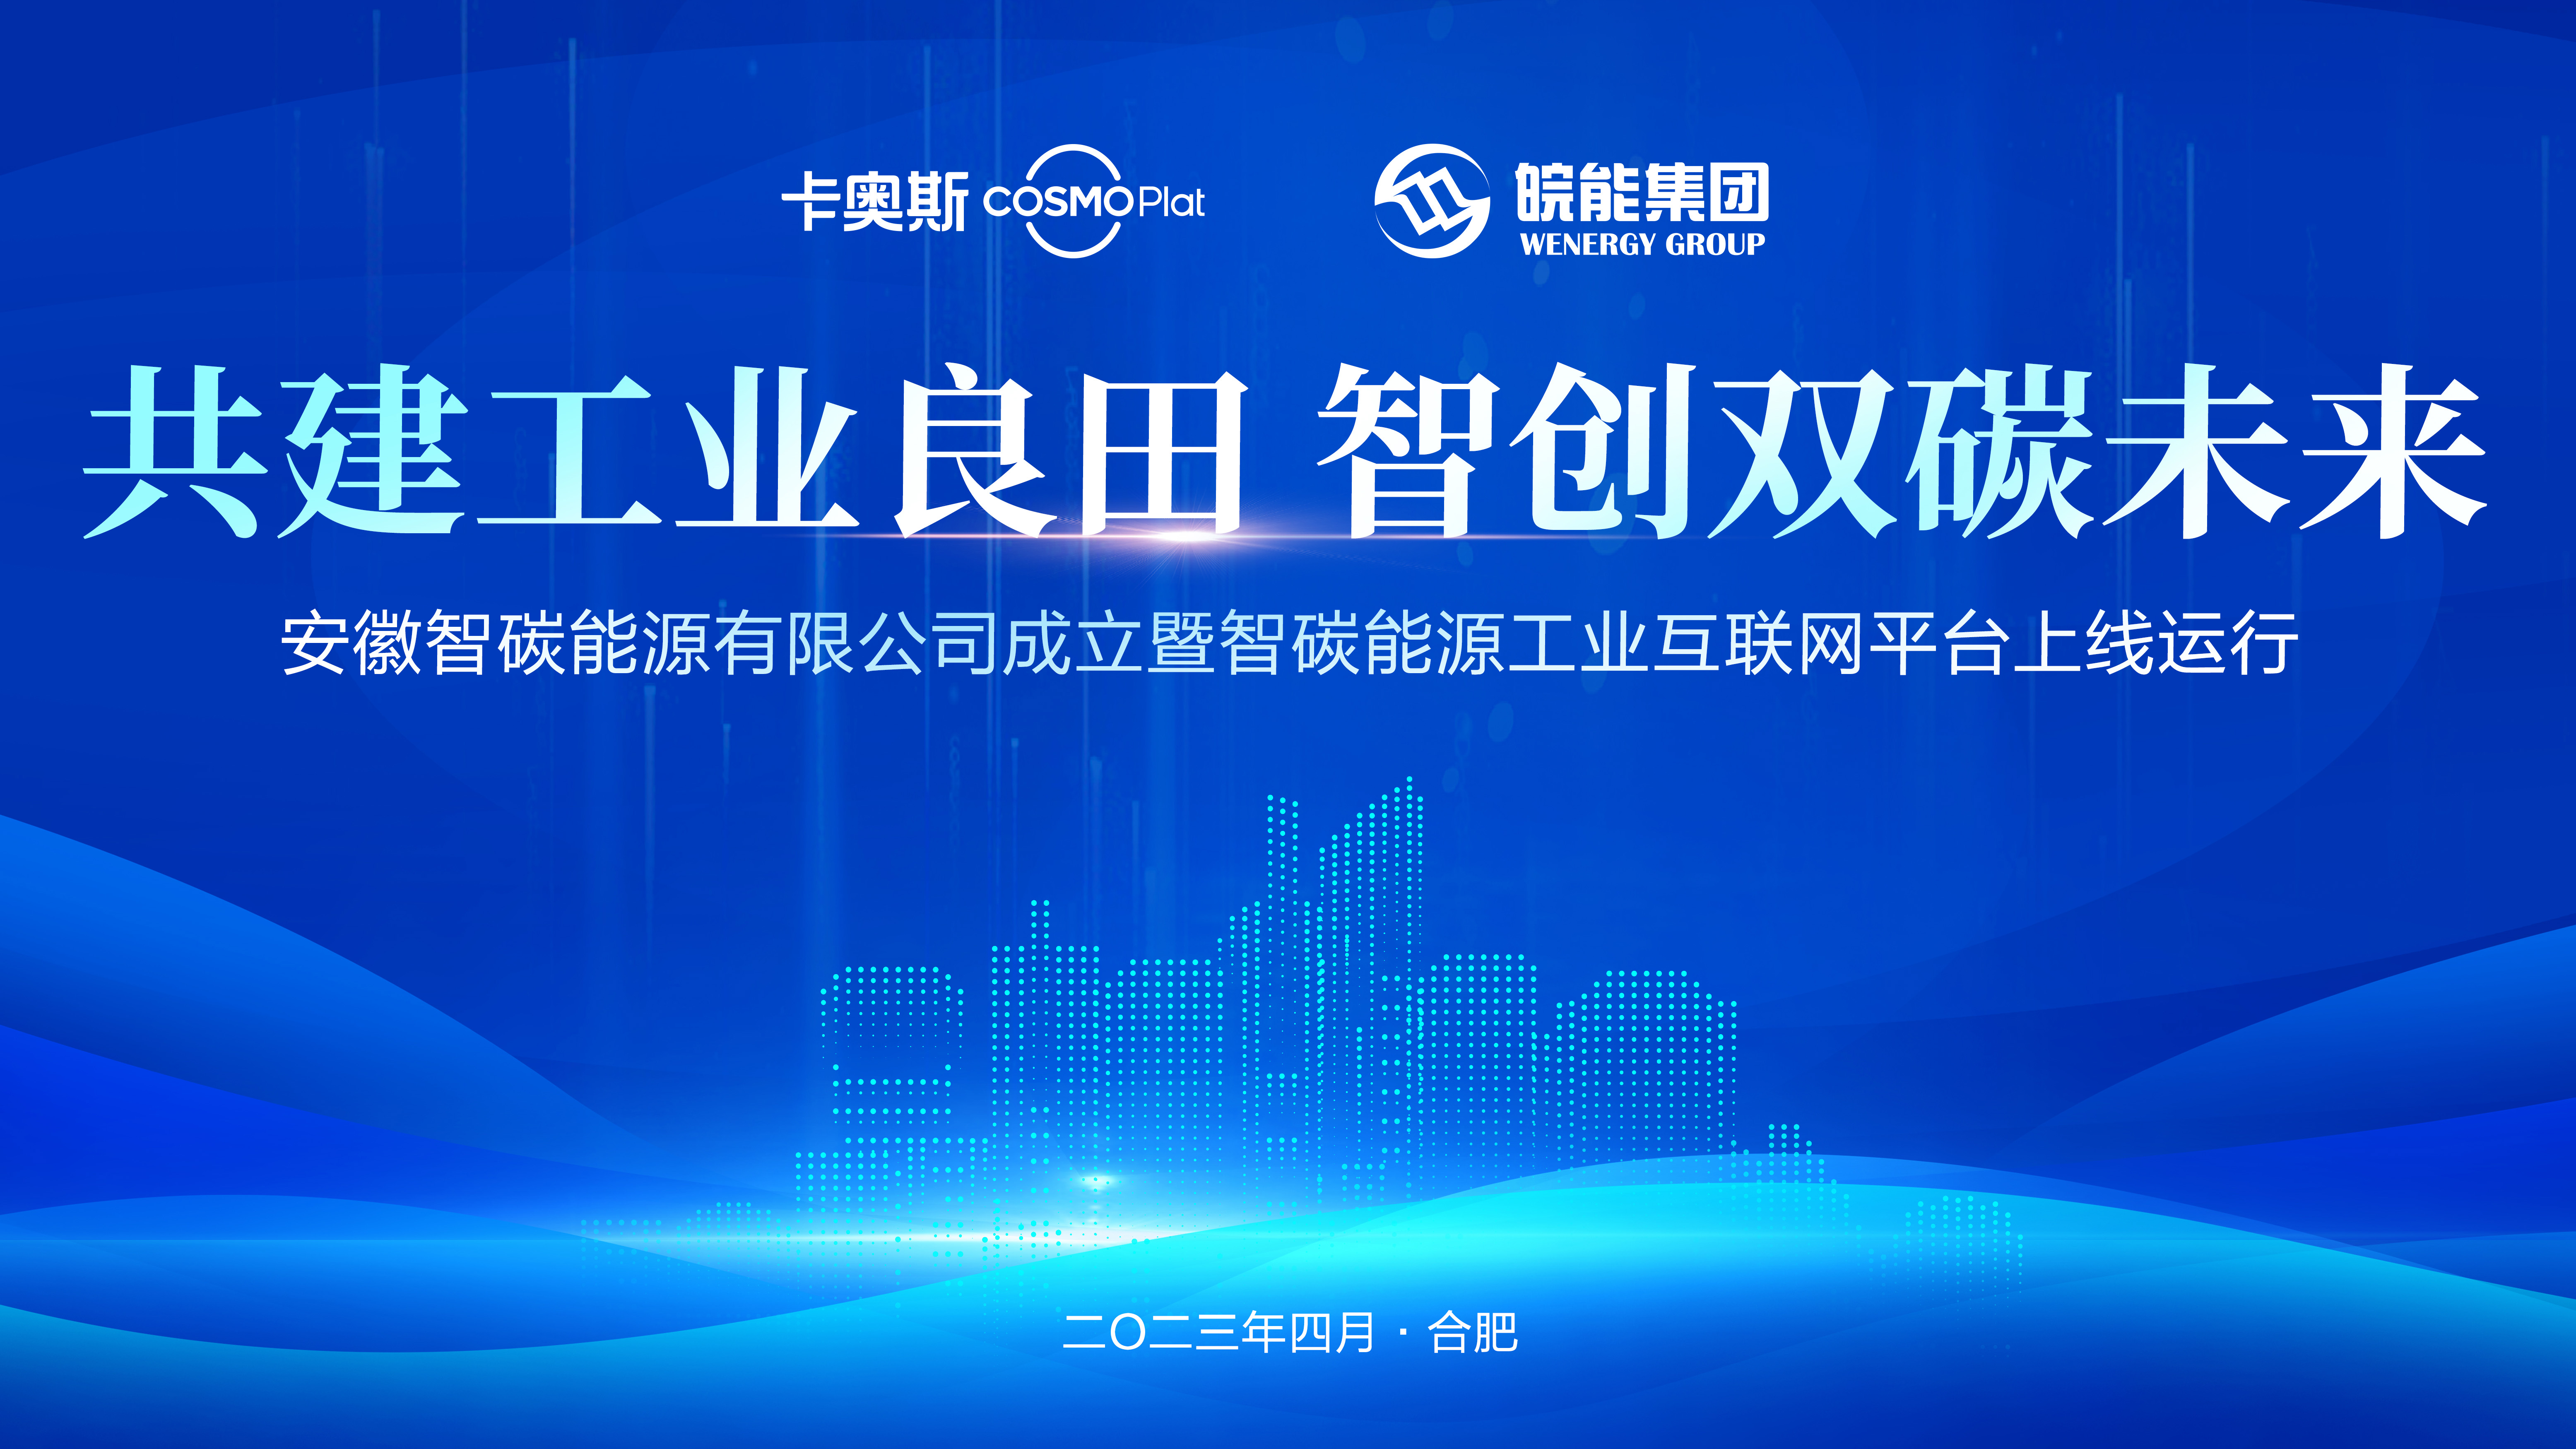 Anhui's first park Energy Industry Internet Platform is launched. Anhui Energy Group and Haierkobos will create a 